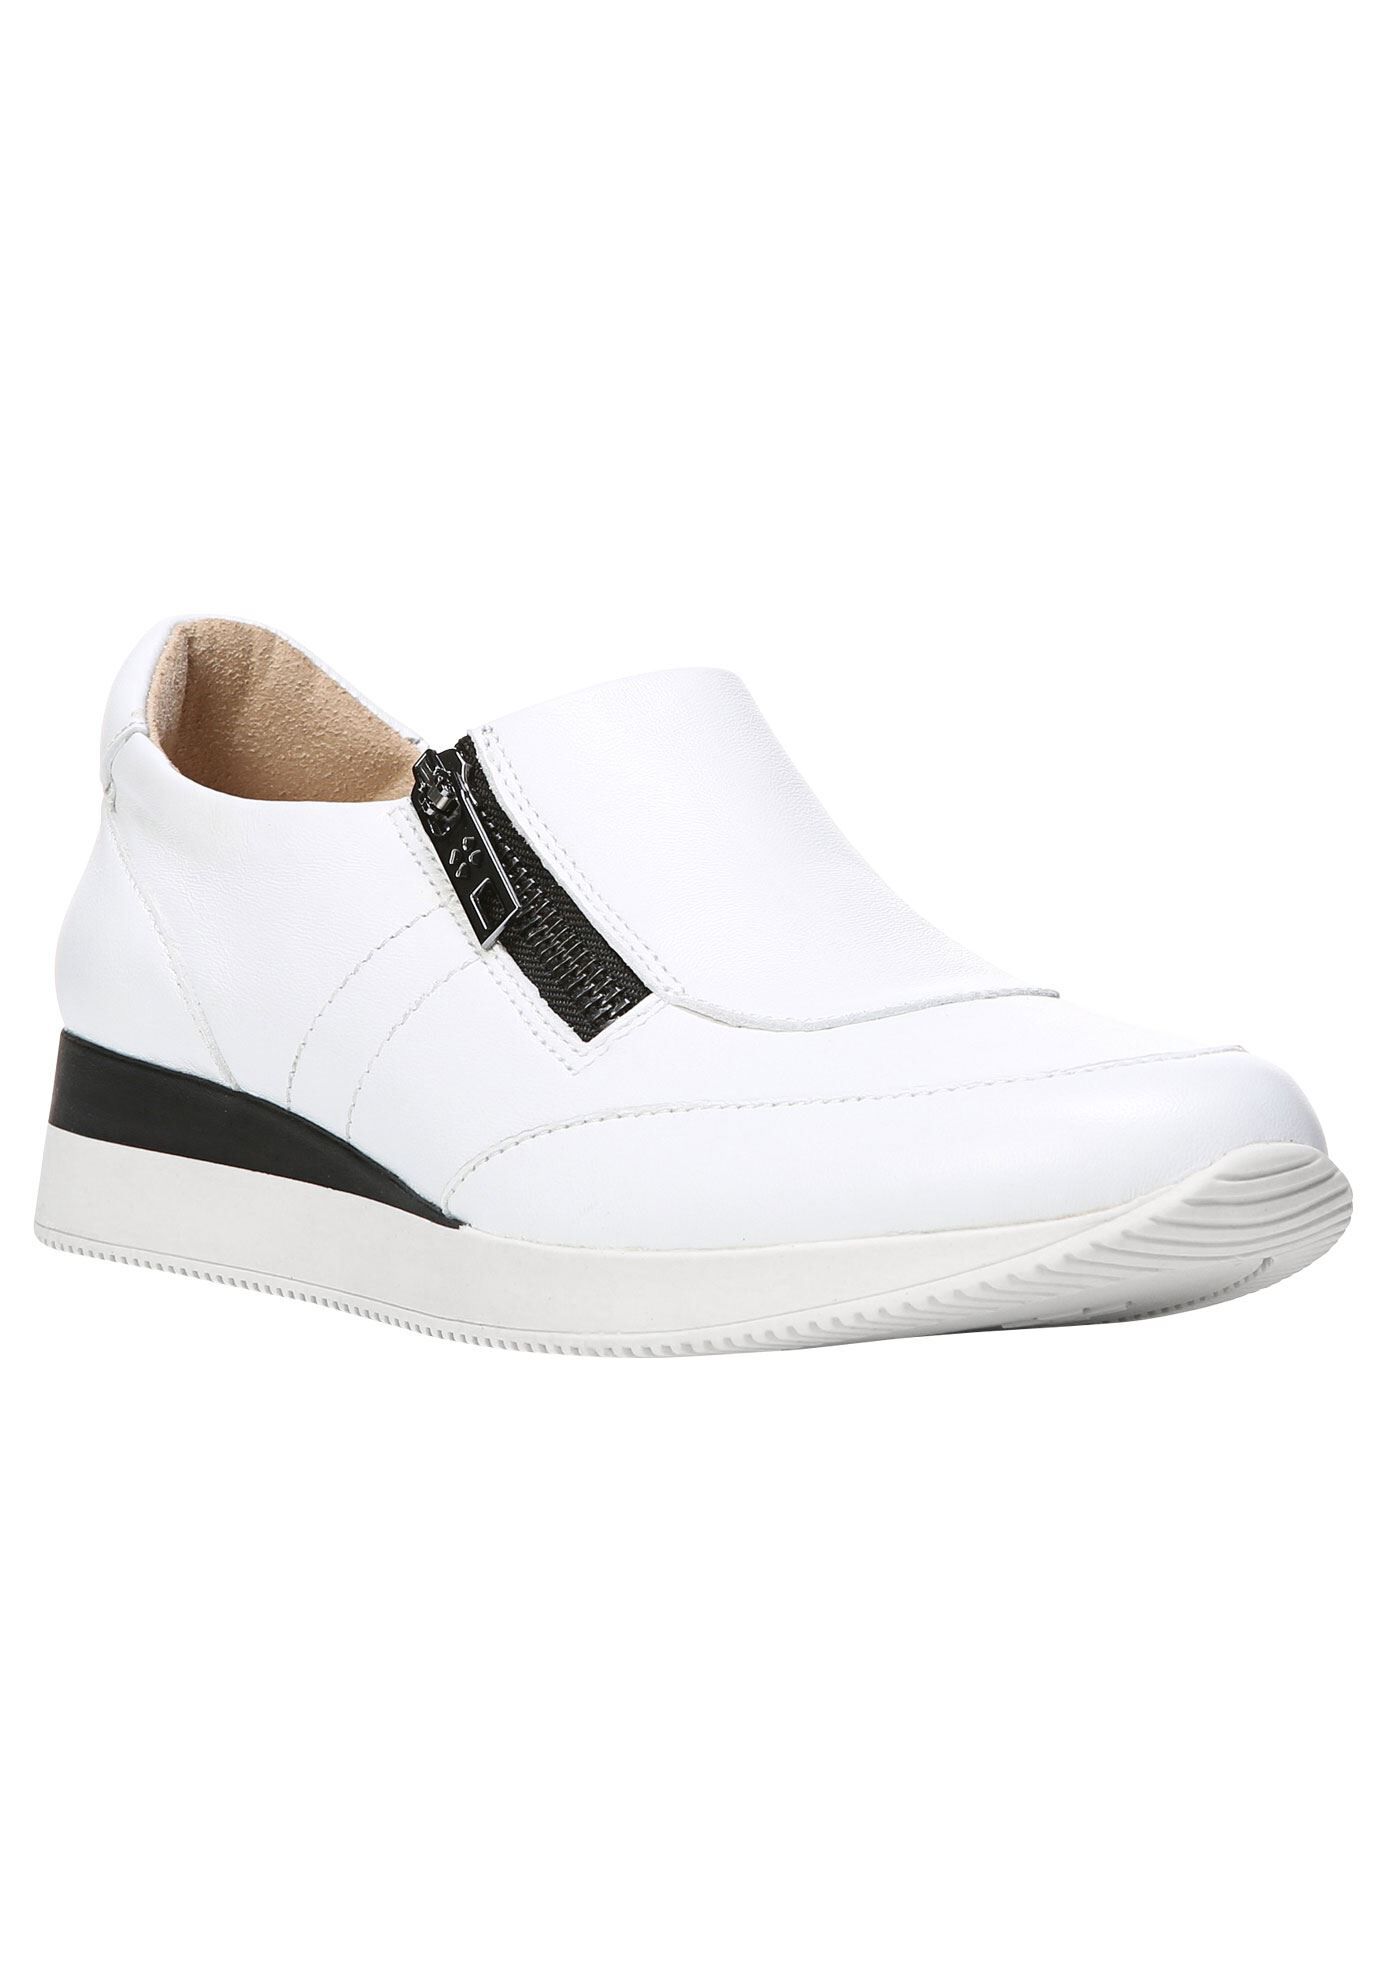 Jetty Sneakers by Naturalizer® | Roaman's